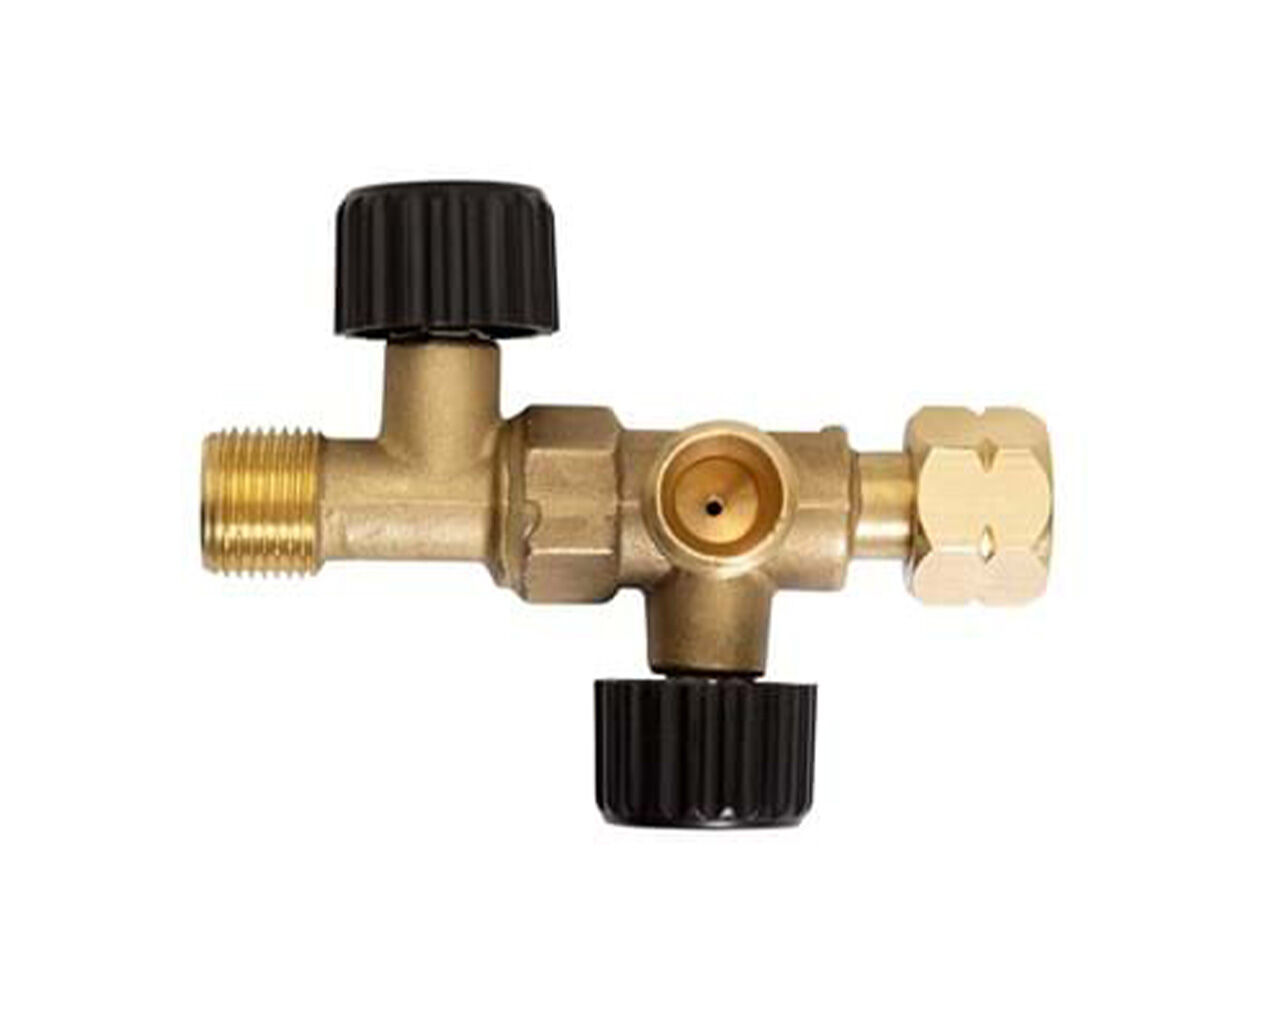 Gasmate Adaptor - 3/8" BSP LH 2 Way Valve with 1 Inlet & 2 Outlets